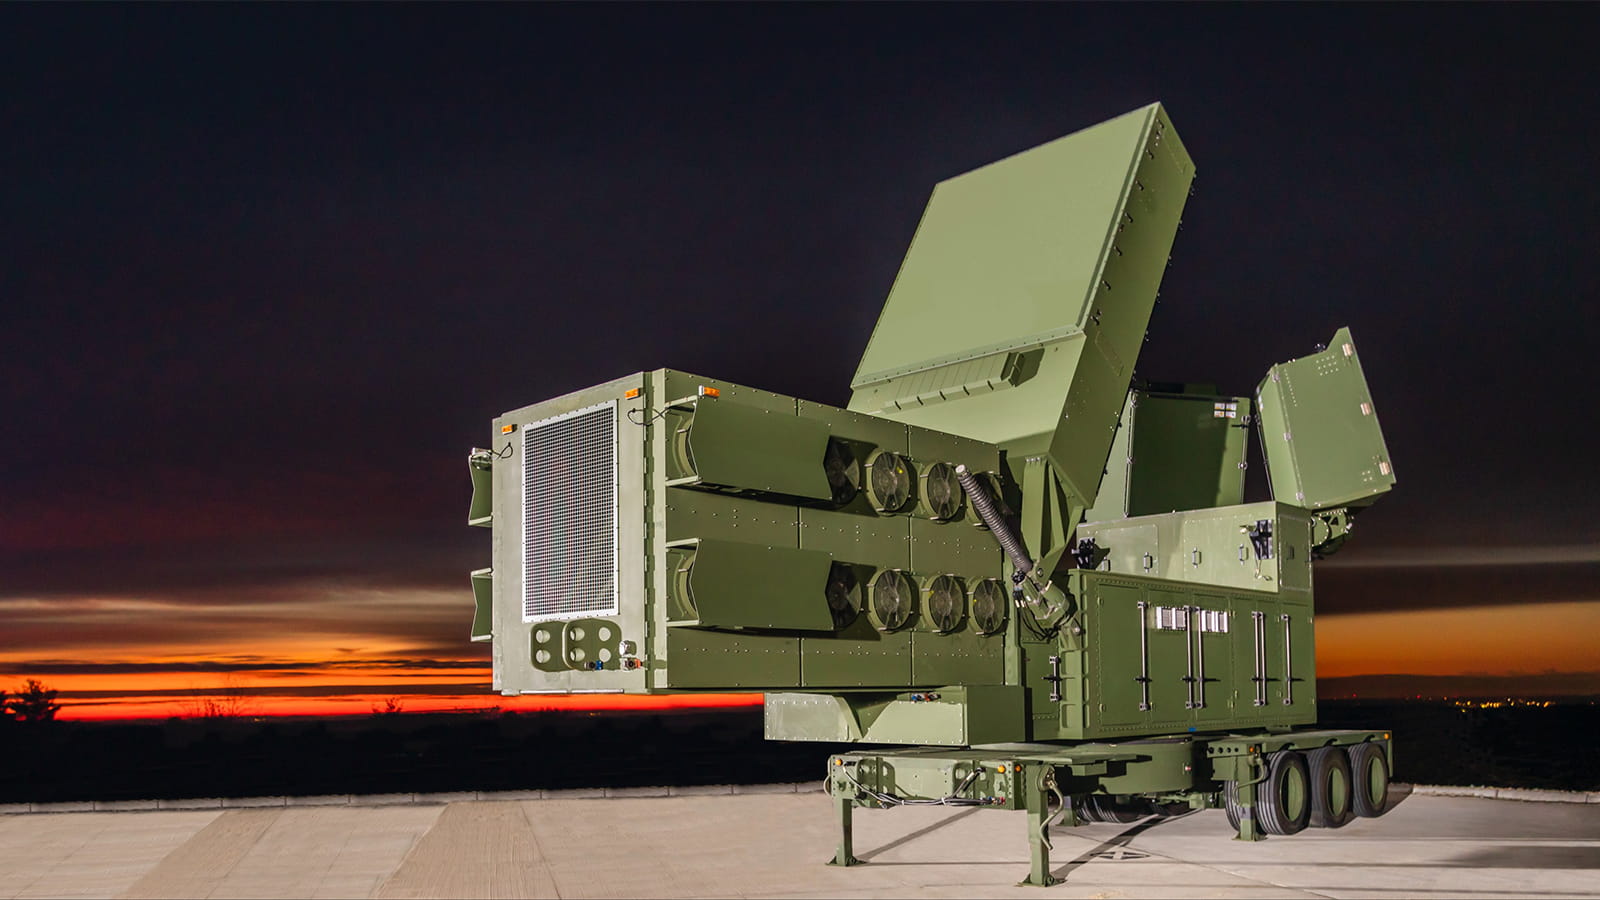 LTAMDS is the next generation air and missile defense radar for the U.S. Army. A 360-degree, Active Electronically Scanned Array radar, powered by Raytheon-manufactured Gallium Nitride, LTAMDS provides dramatically more performance against the range of threats, from manned and unmanned aircraft to cruise missiles, ballistic missiles and hypersonics.